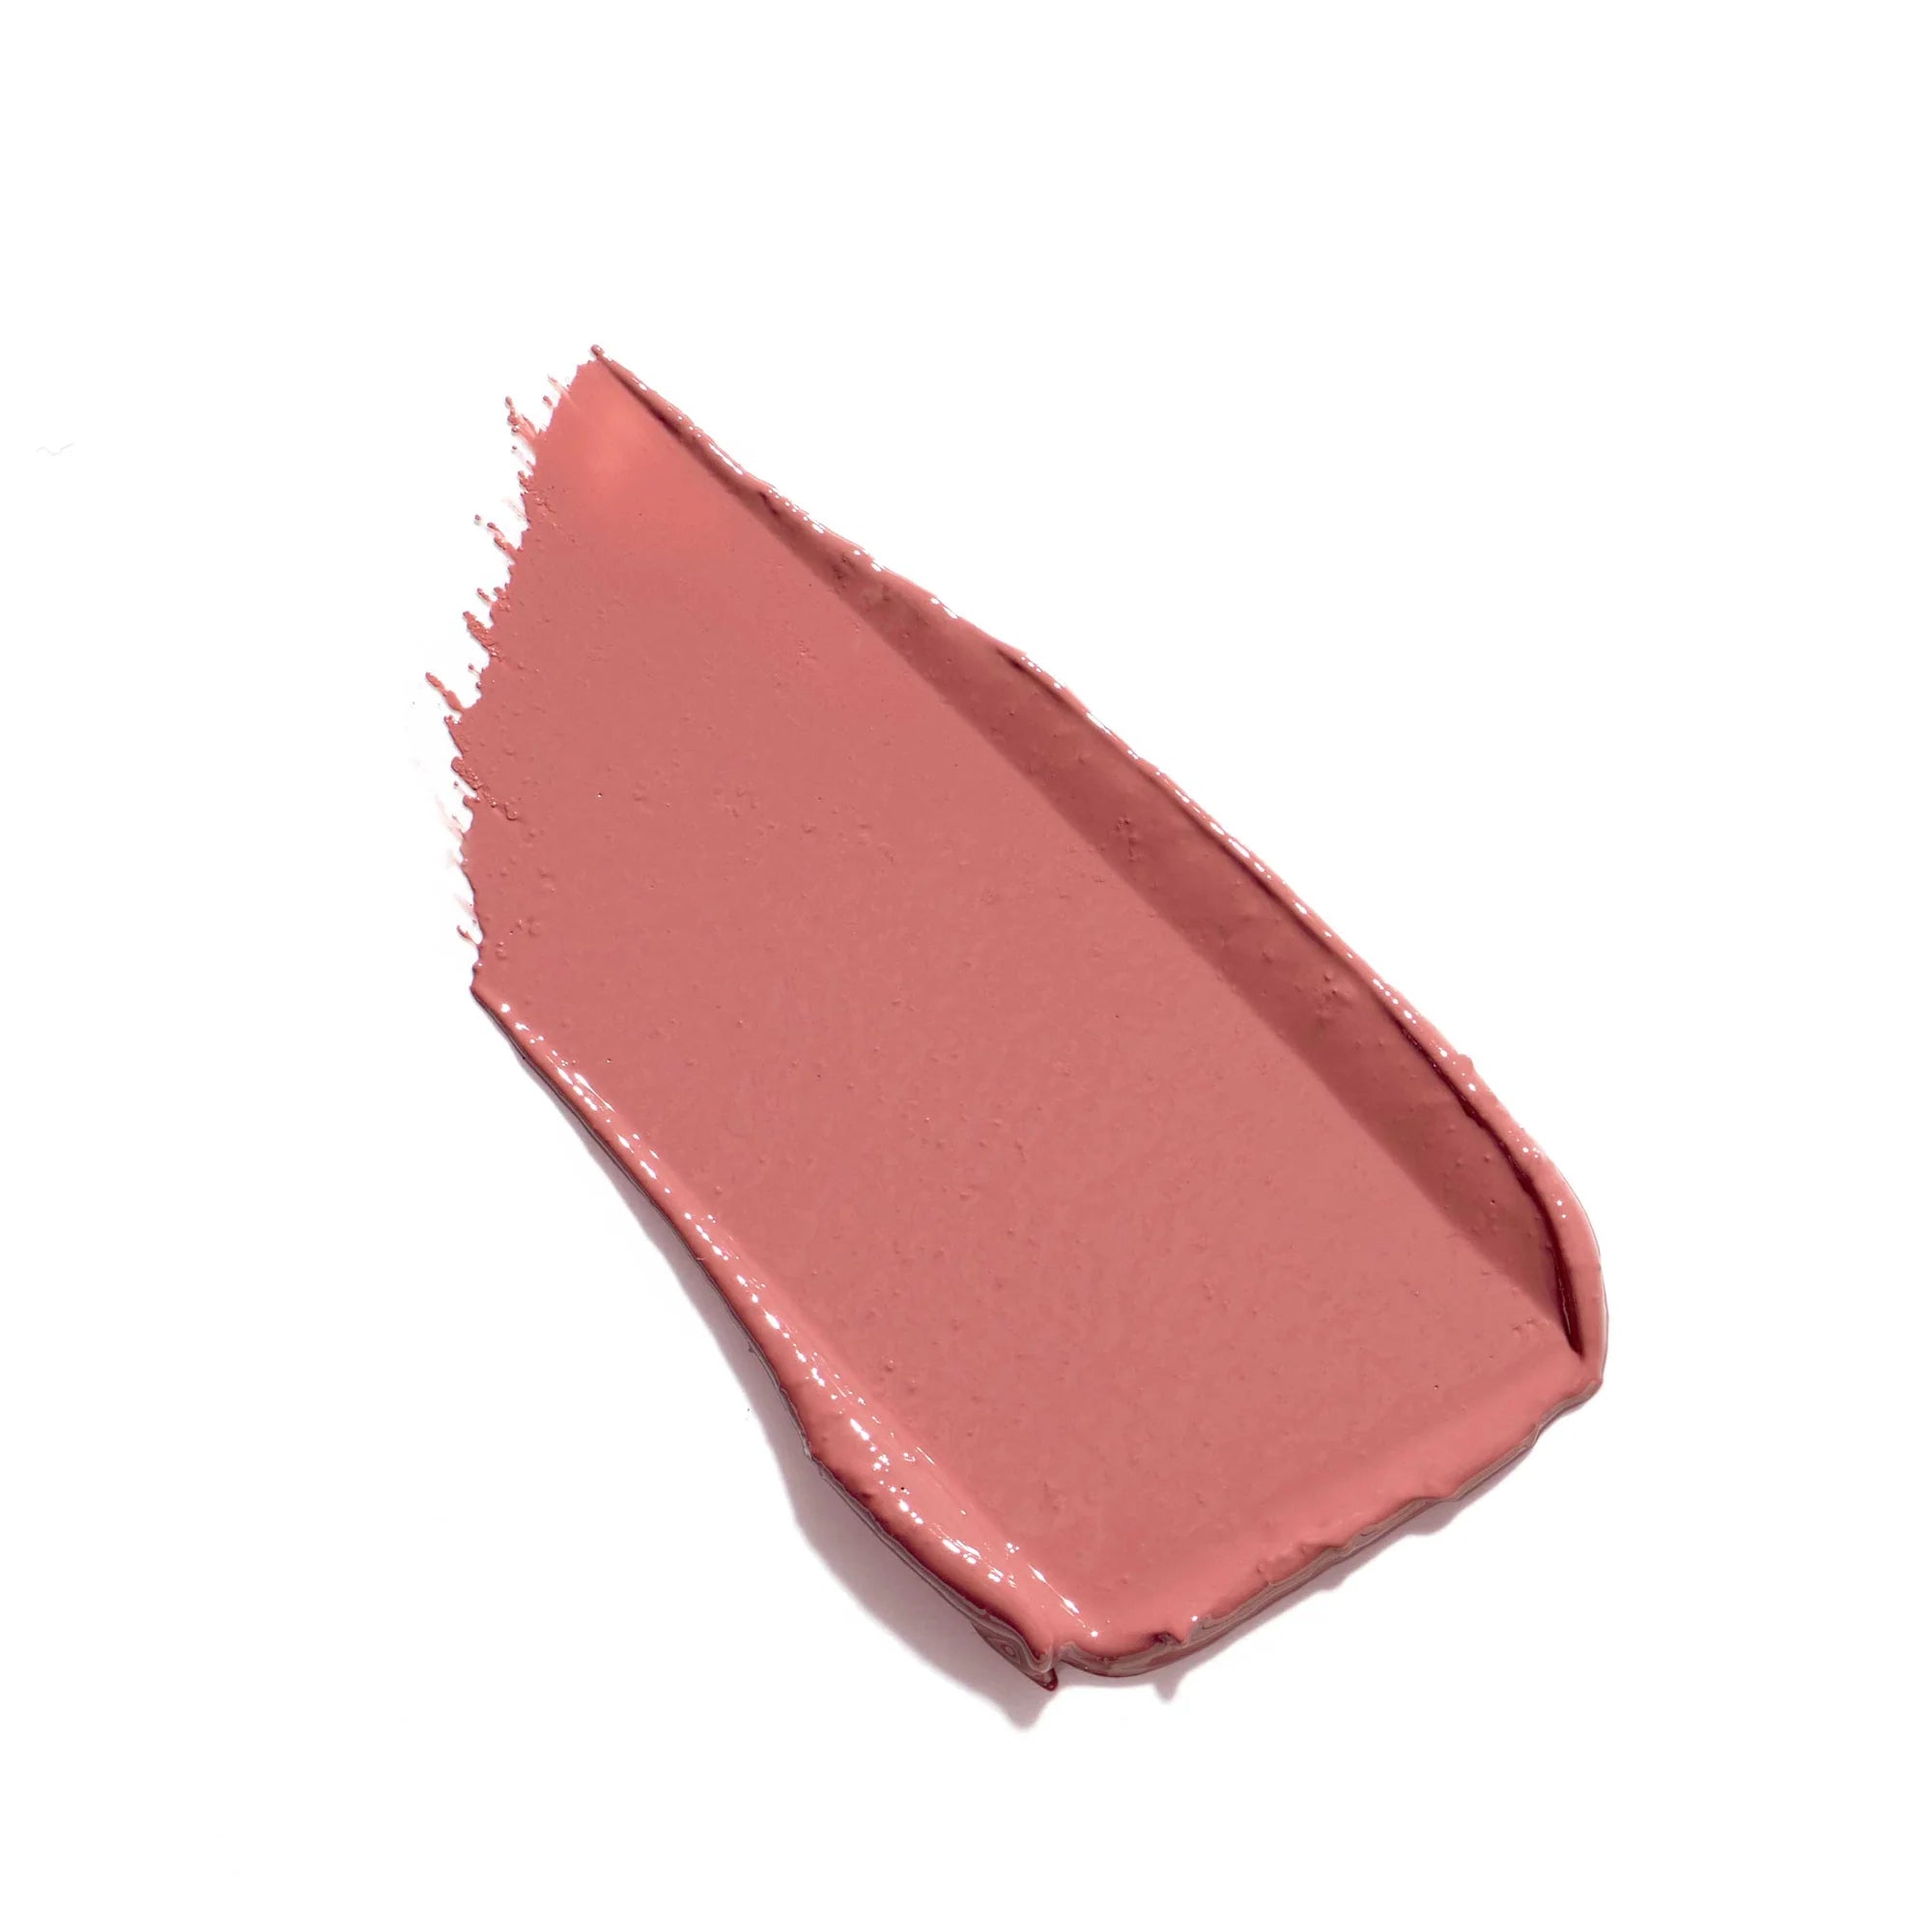 Jane Iredale's ColorLuxe Hydrating Cream Lipstick - swatch and color Tutu - cool medium soft pink